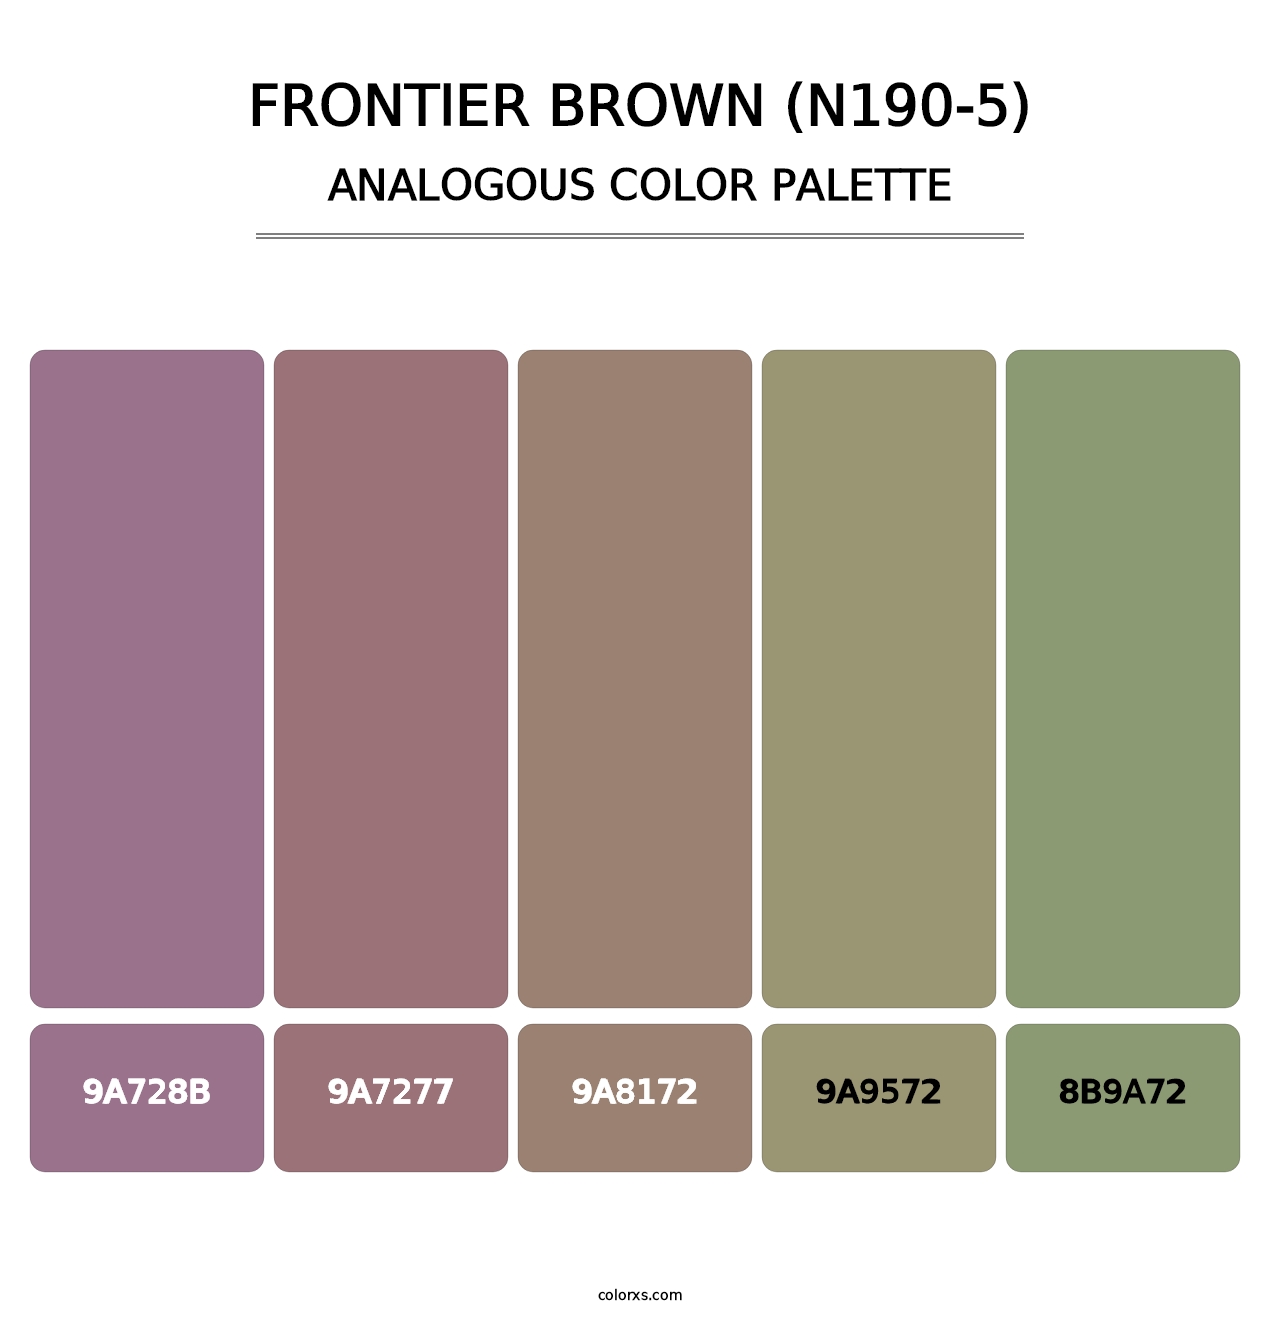 Frontier Brown (N190-5) - Analogous Color Palette